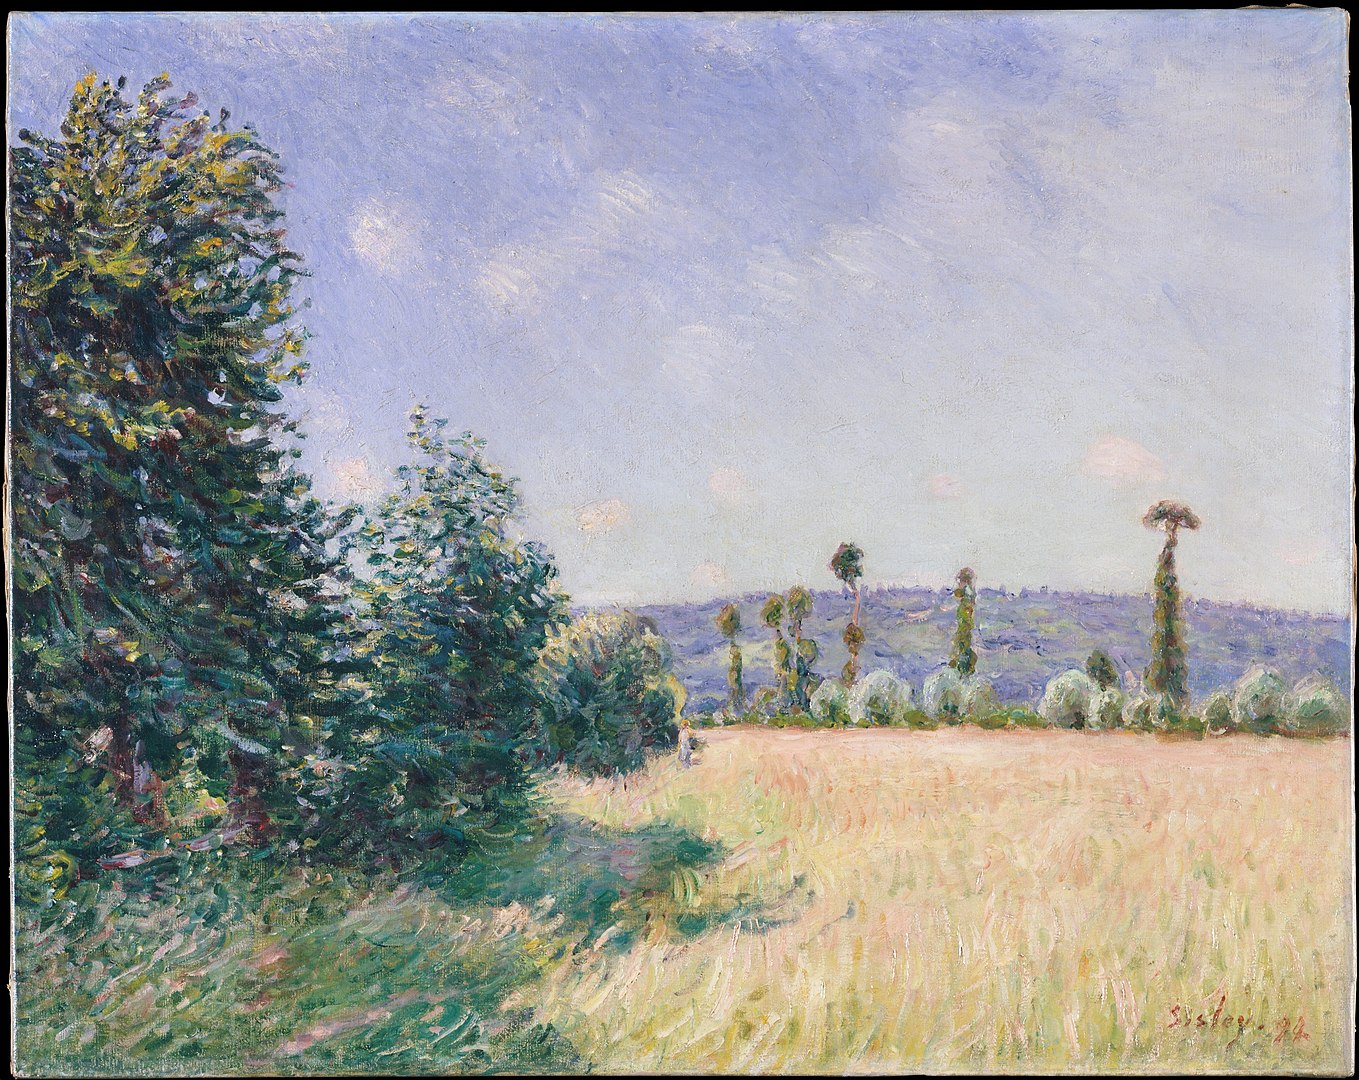 A landscape view of a meadow